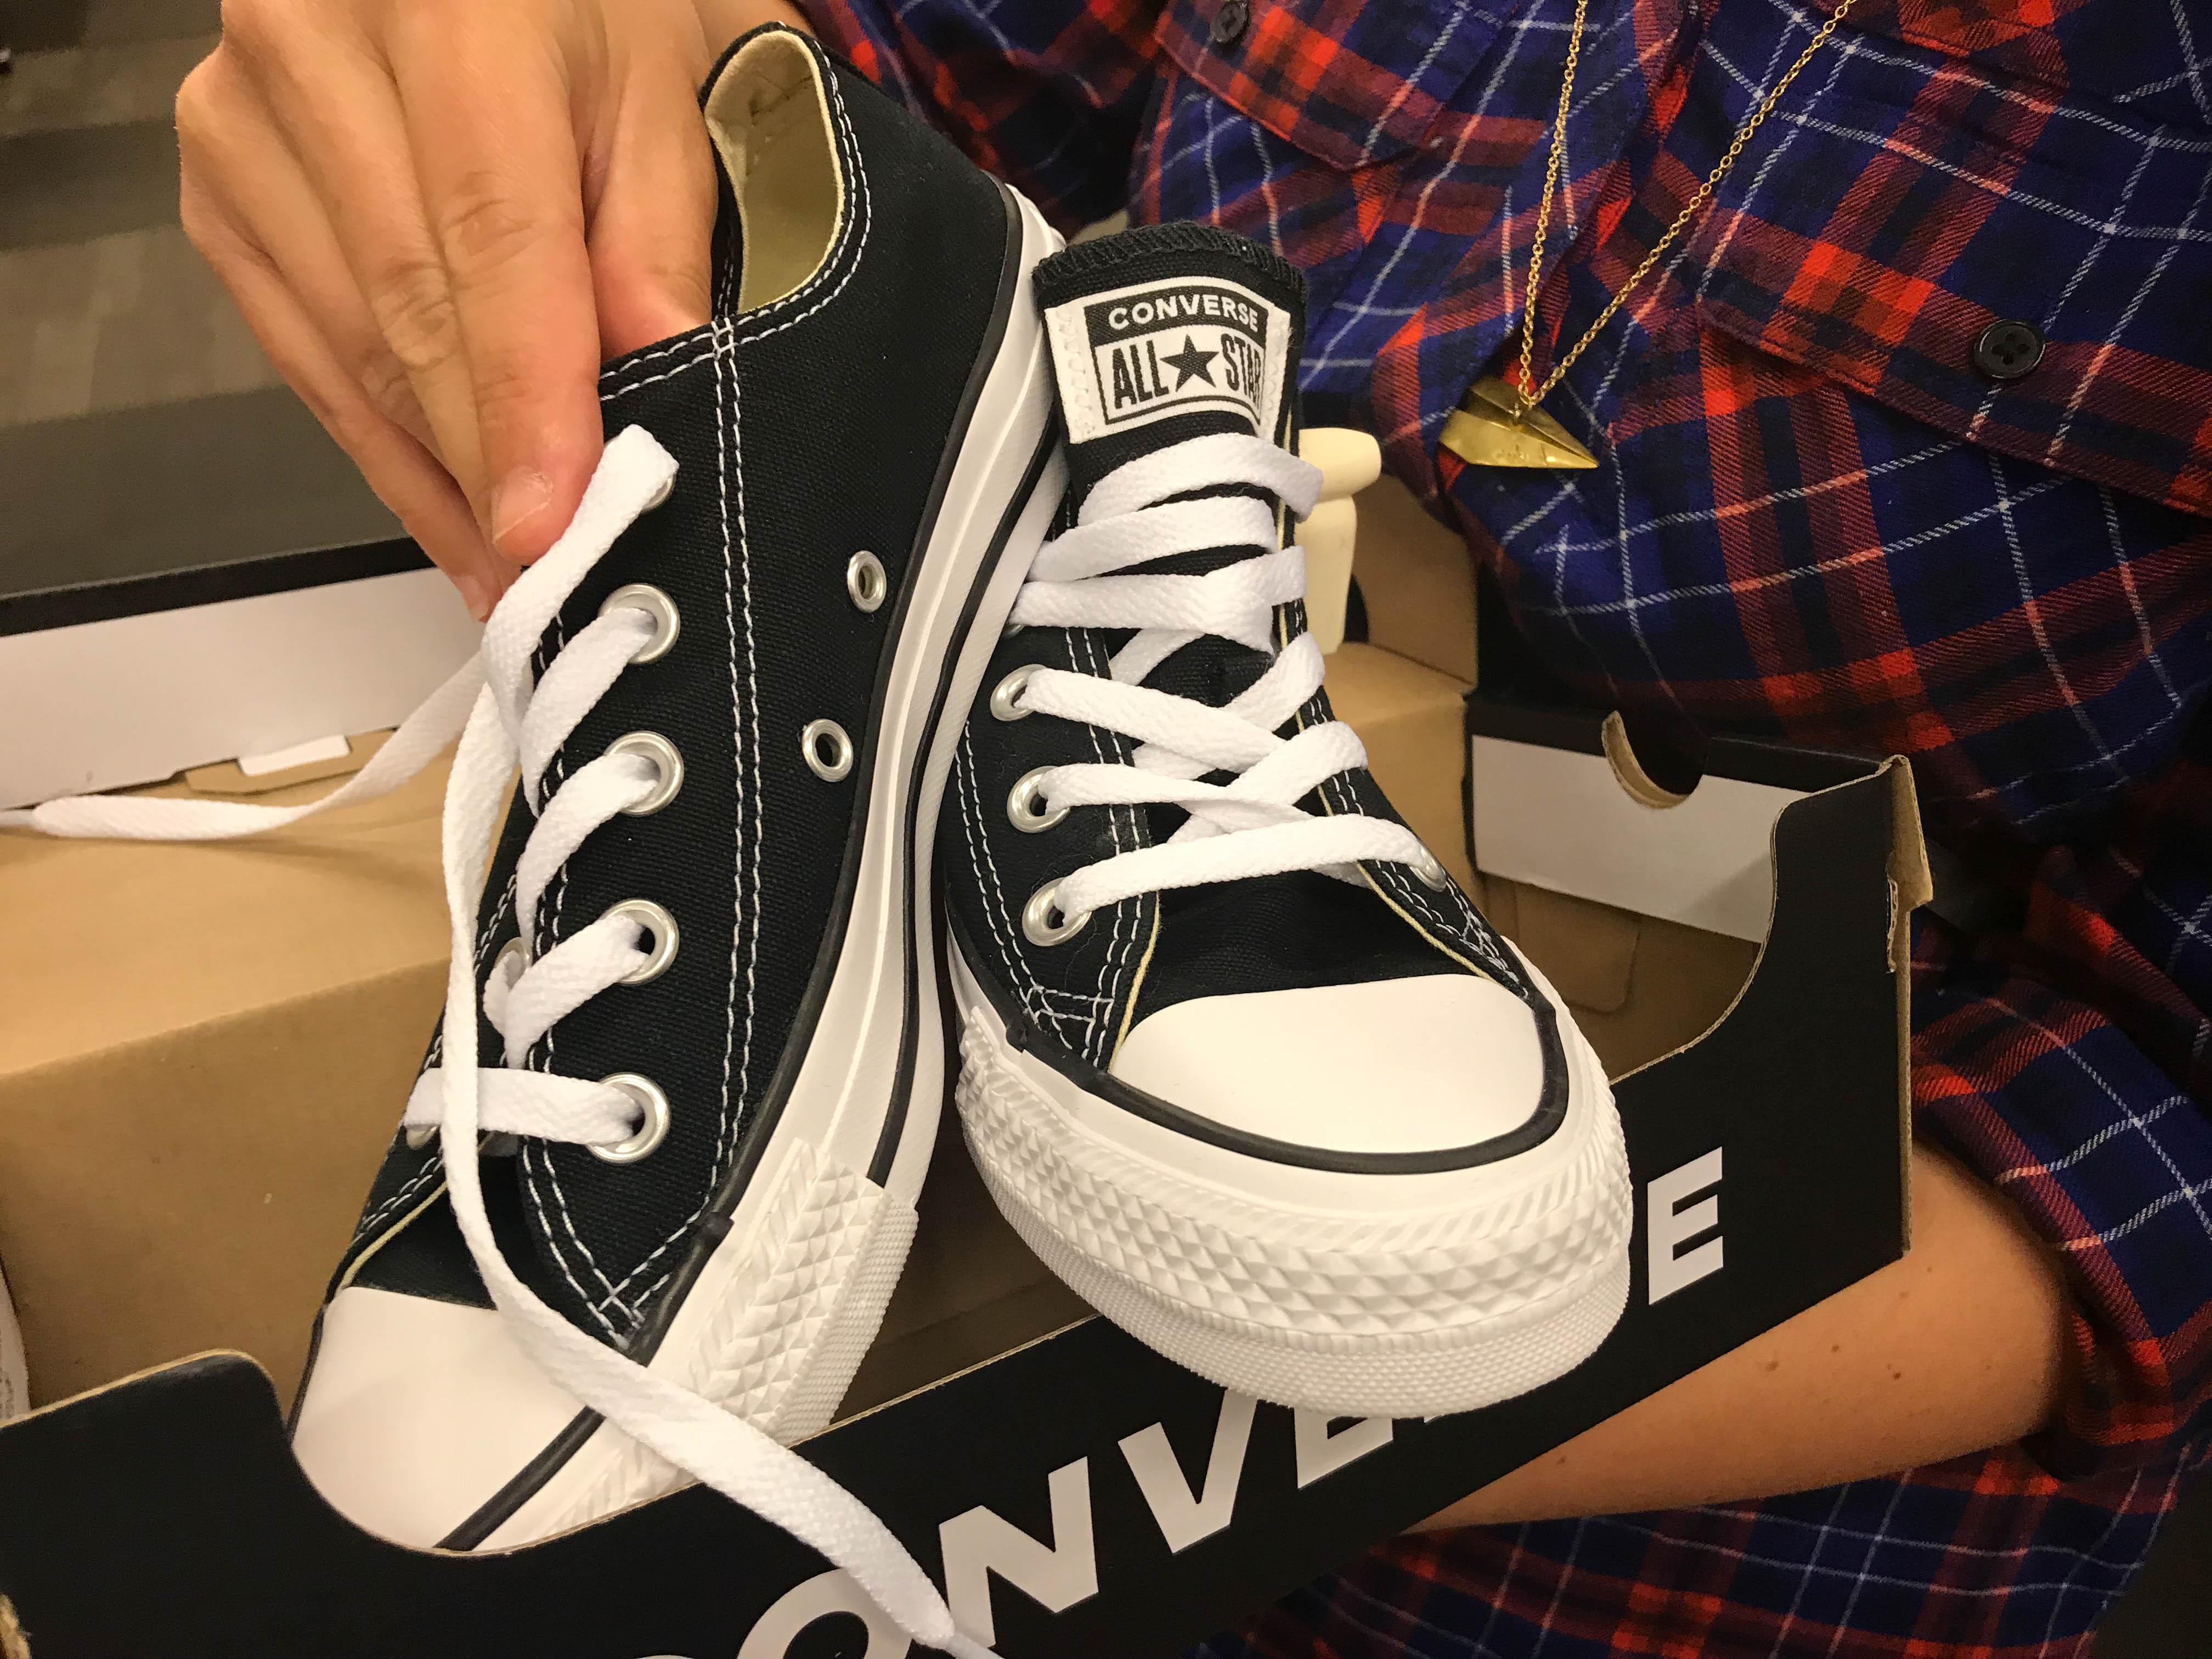 who sells converse in half sizes